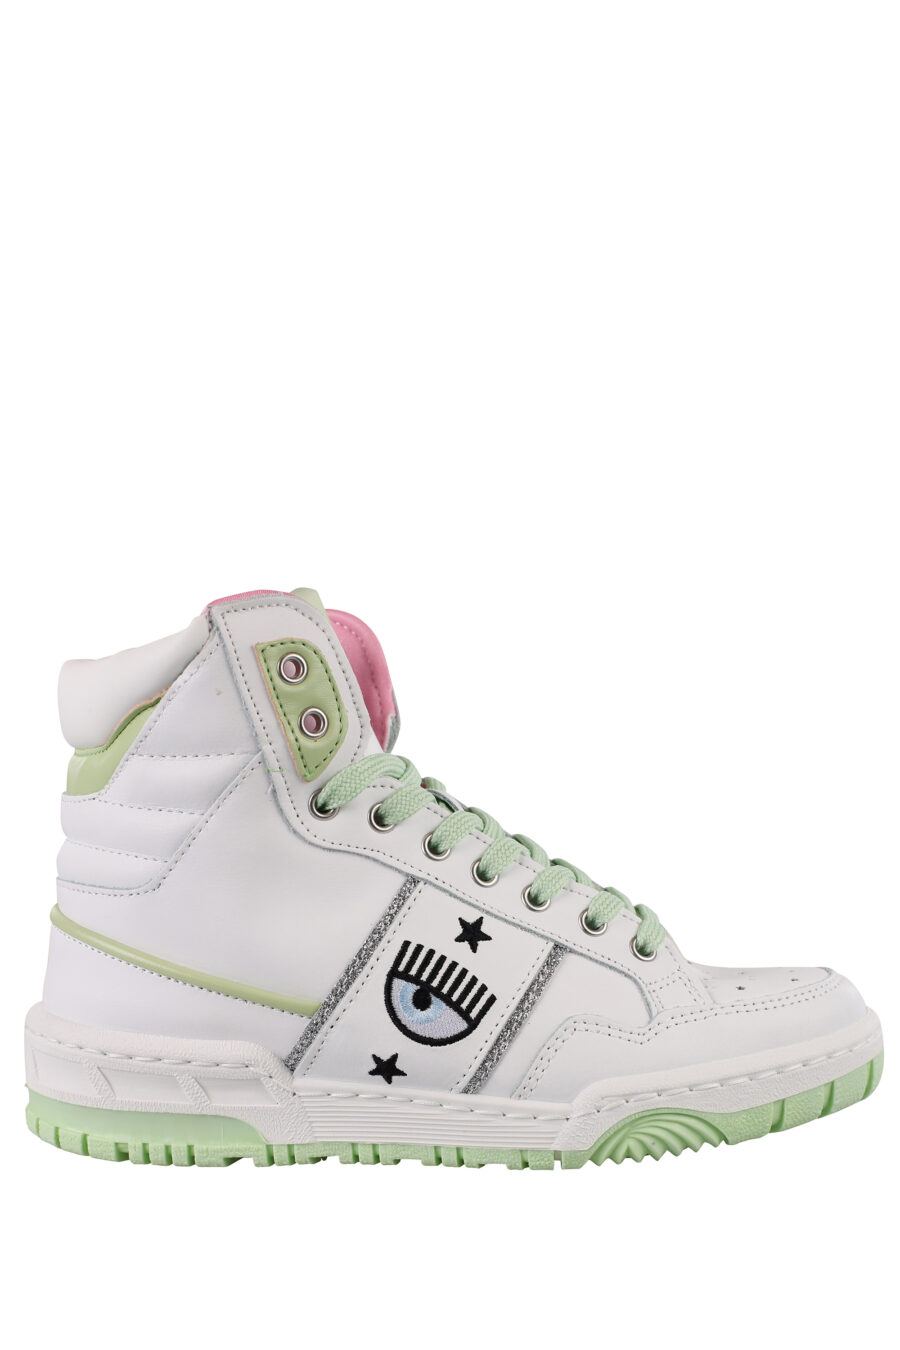 White and green trainers with eye logo and pink details - IMG 1168